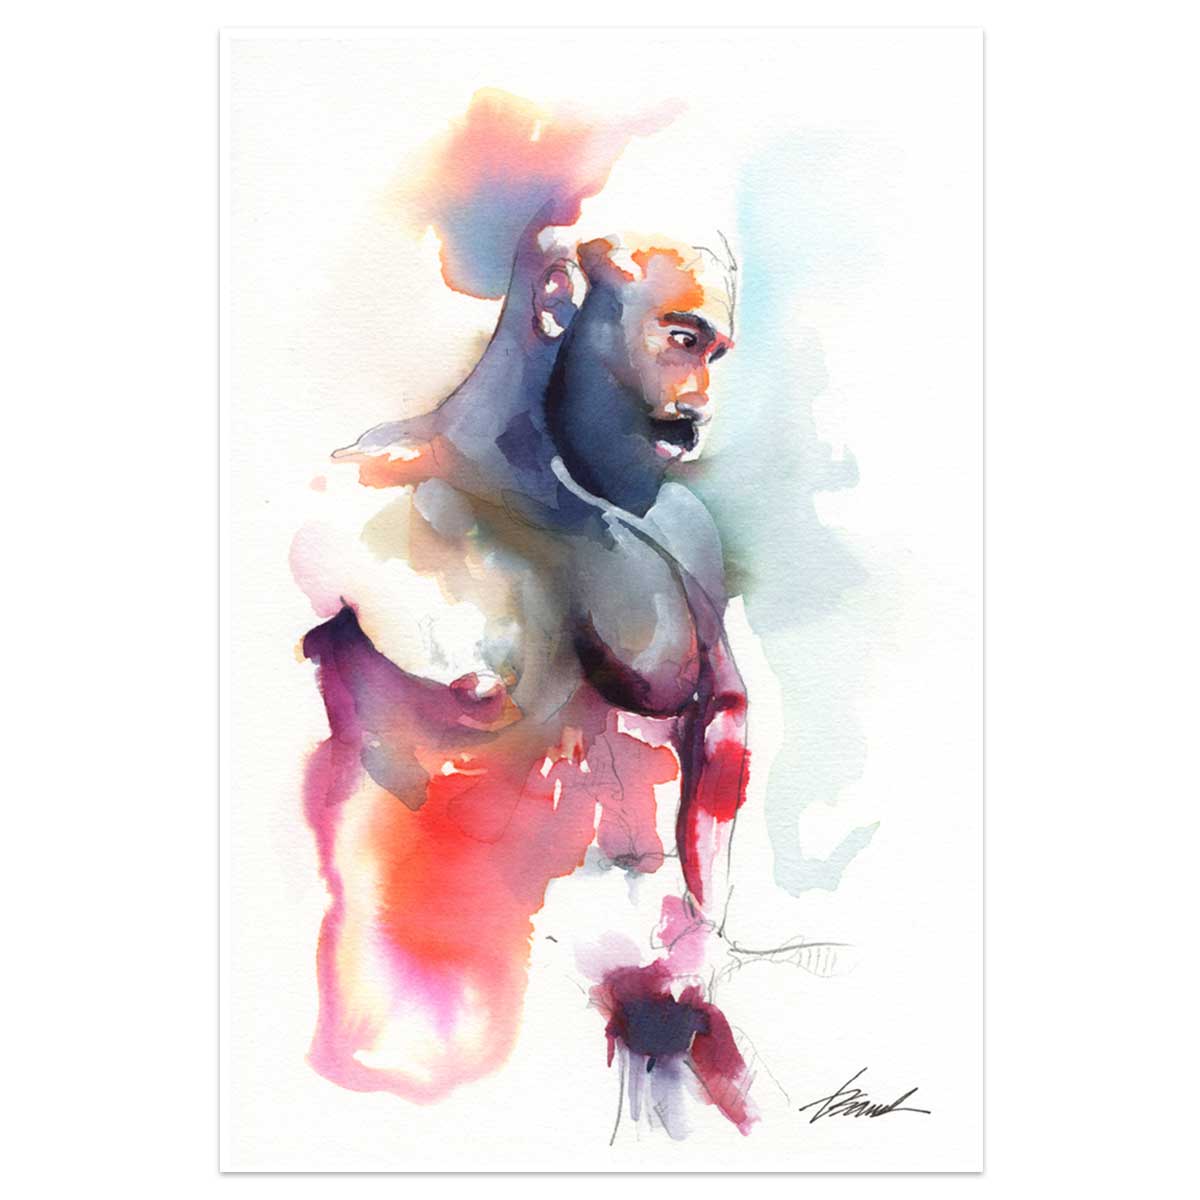 Introspective Bearded Man in Profile - 6x9" Original Watercolor Painting